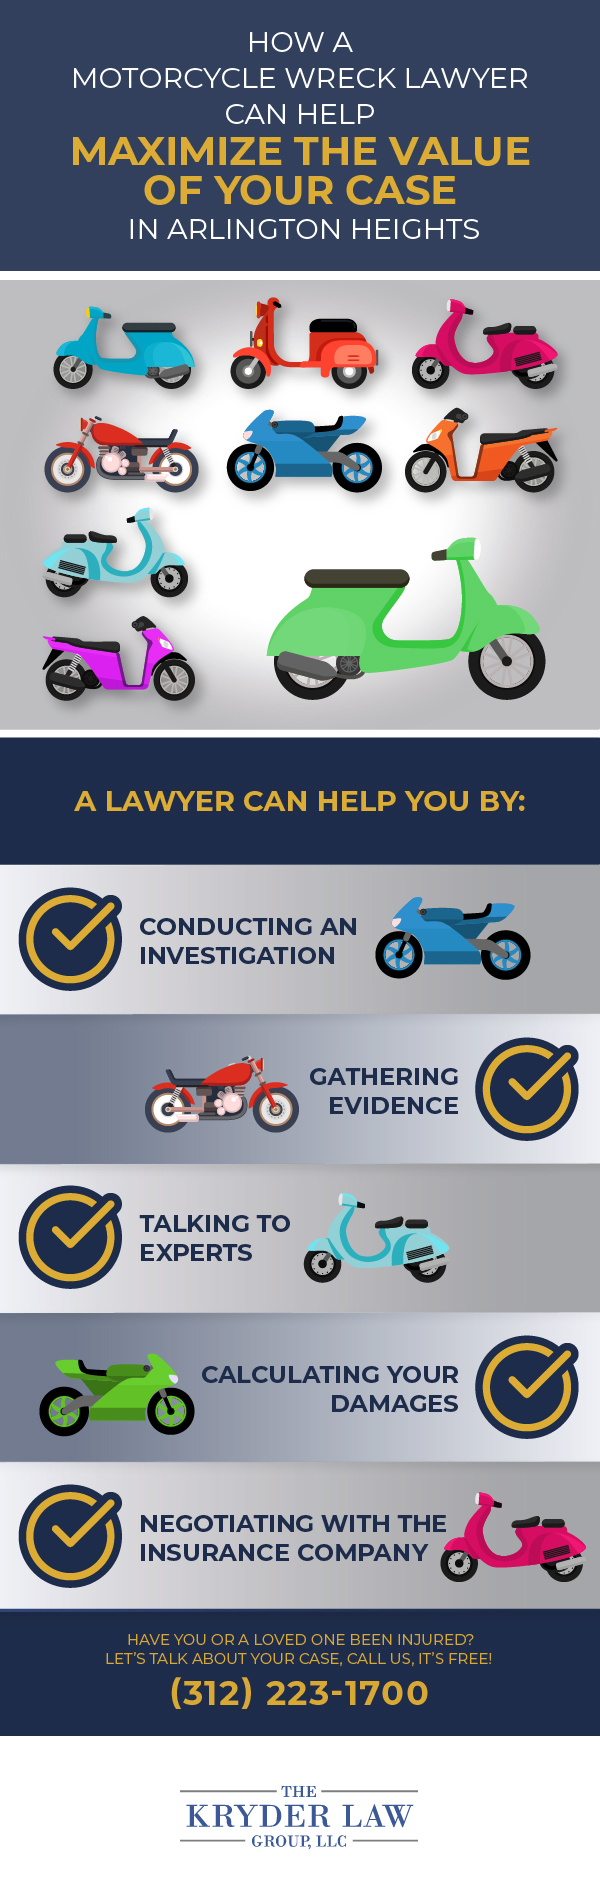 How a Motorcycle Wreck Lawyer Can Help Maximize the Value of Your Case in Arlington Heights Infographic